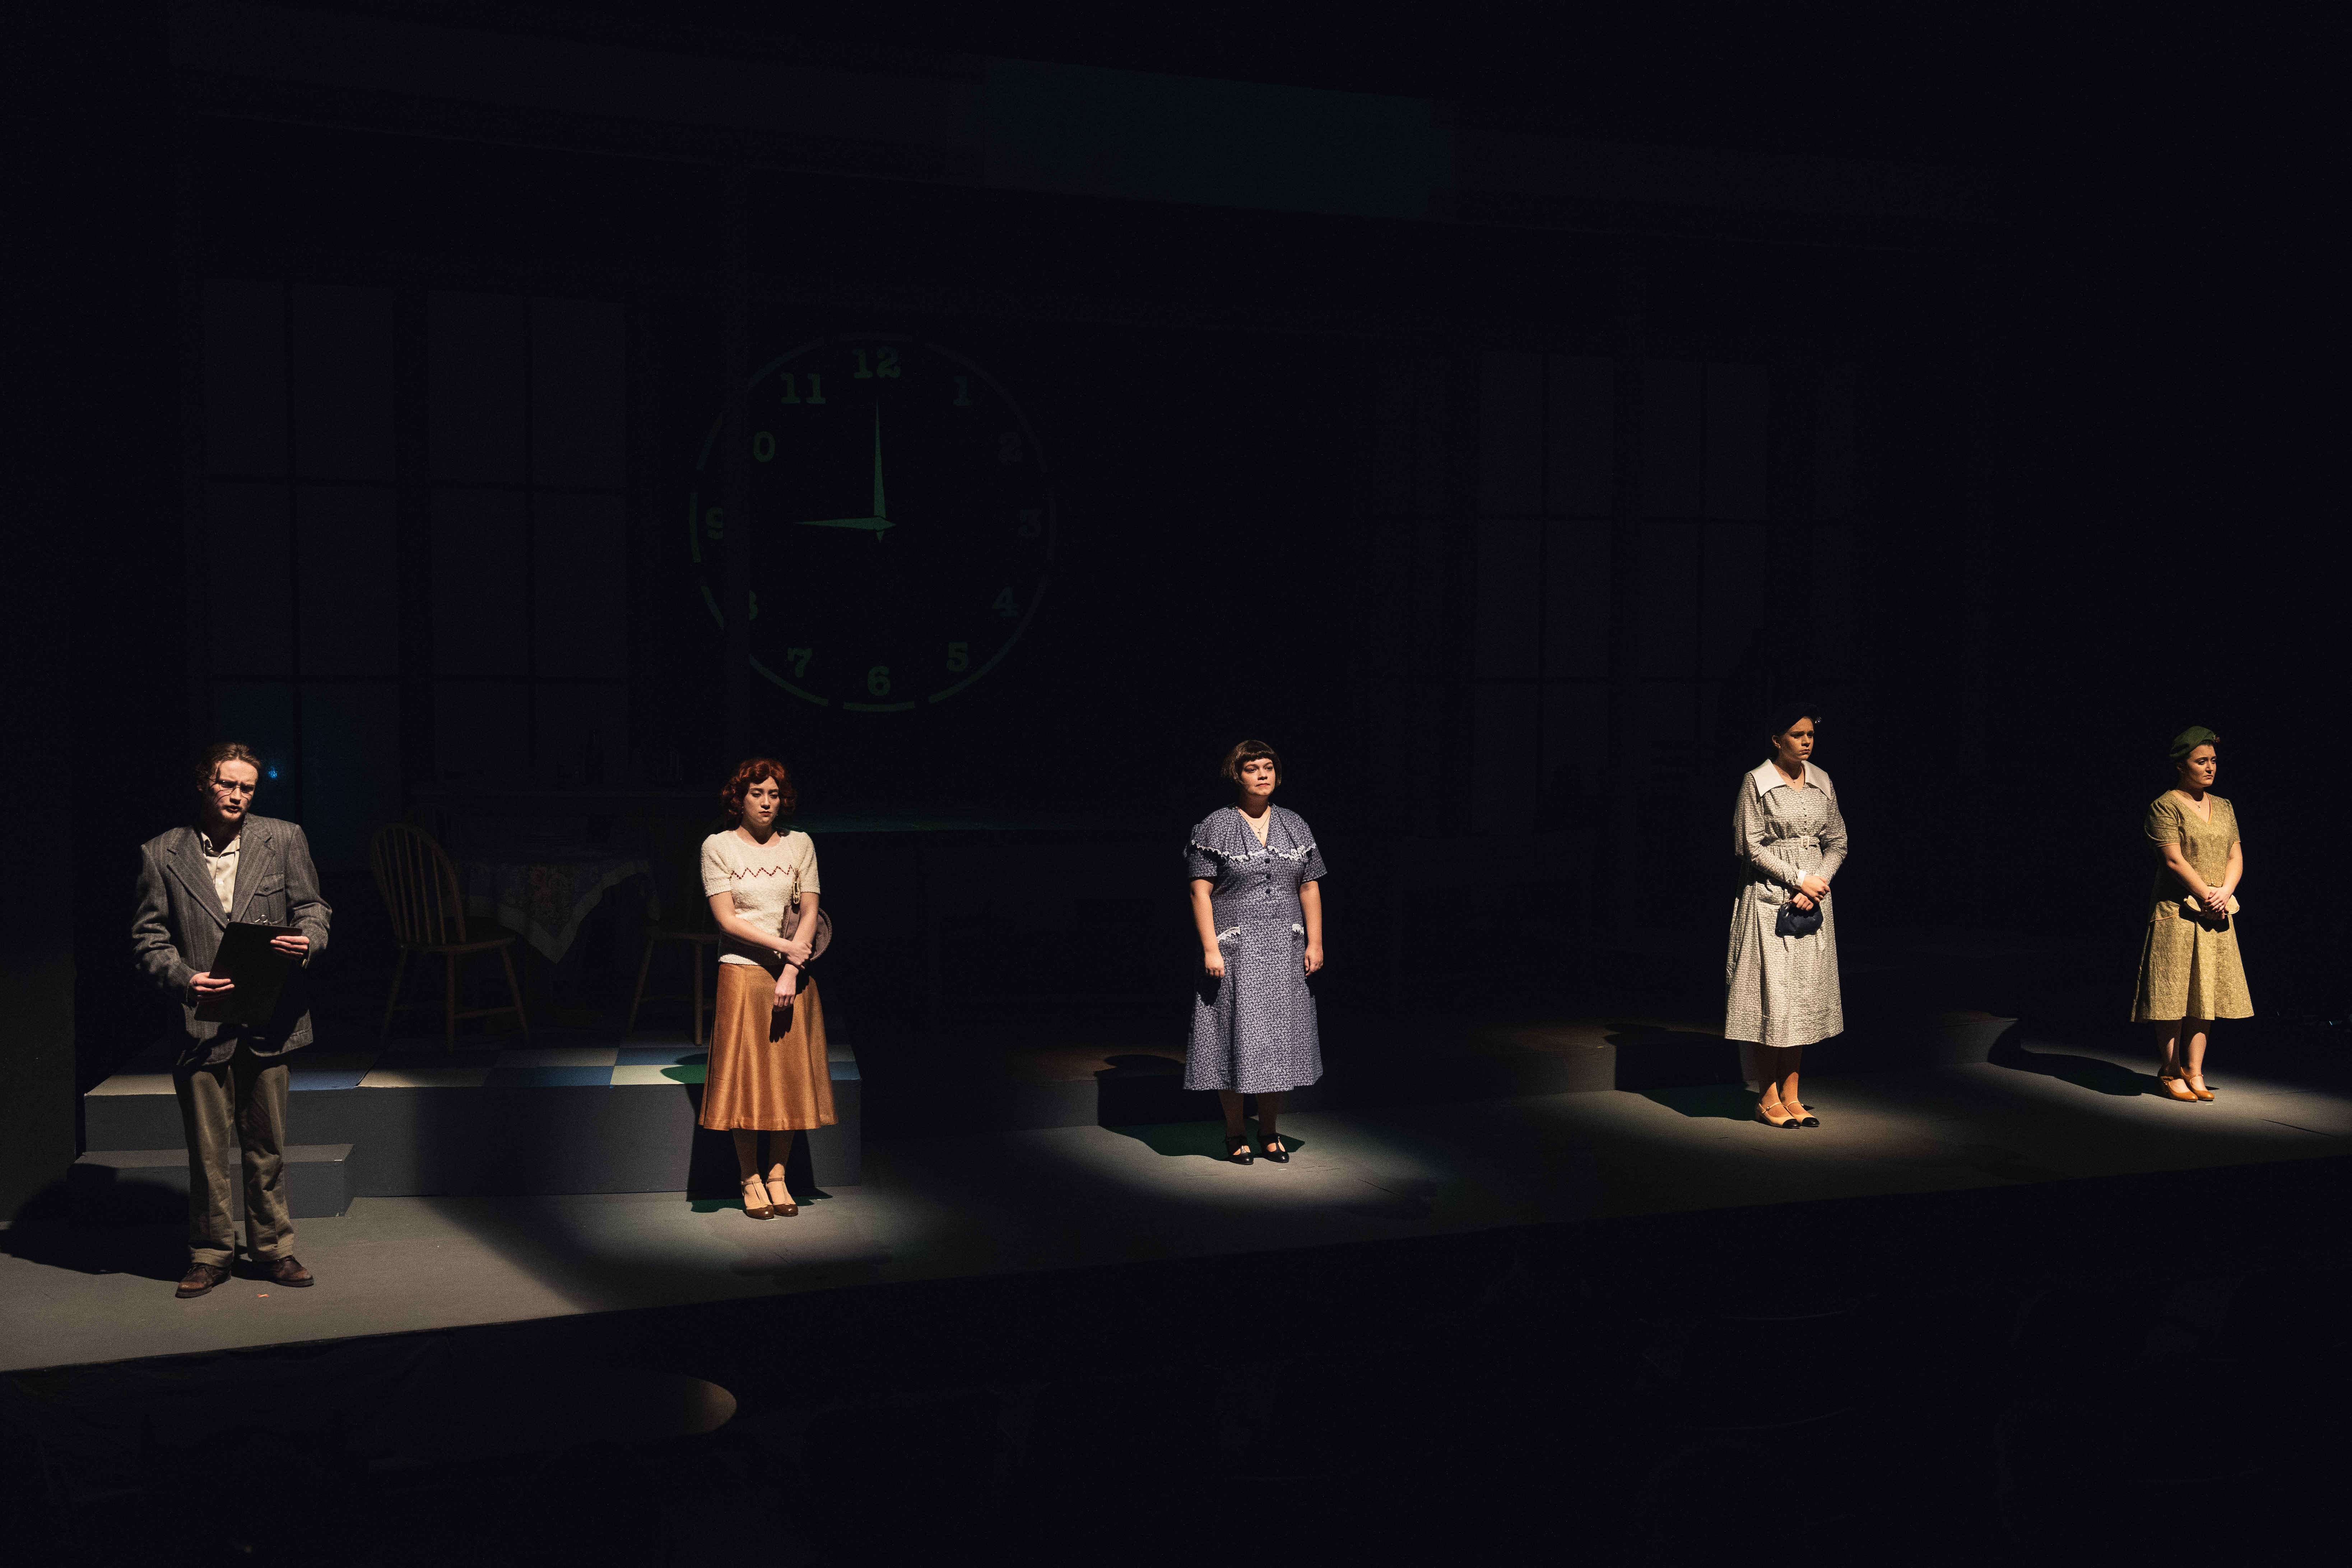 four women and a man stand in spotlights across a stage